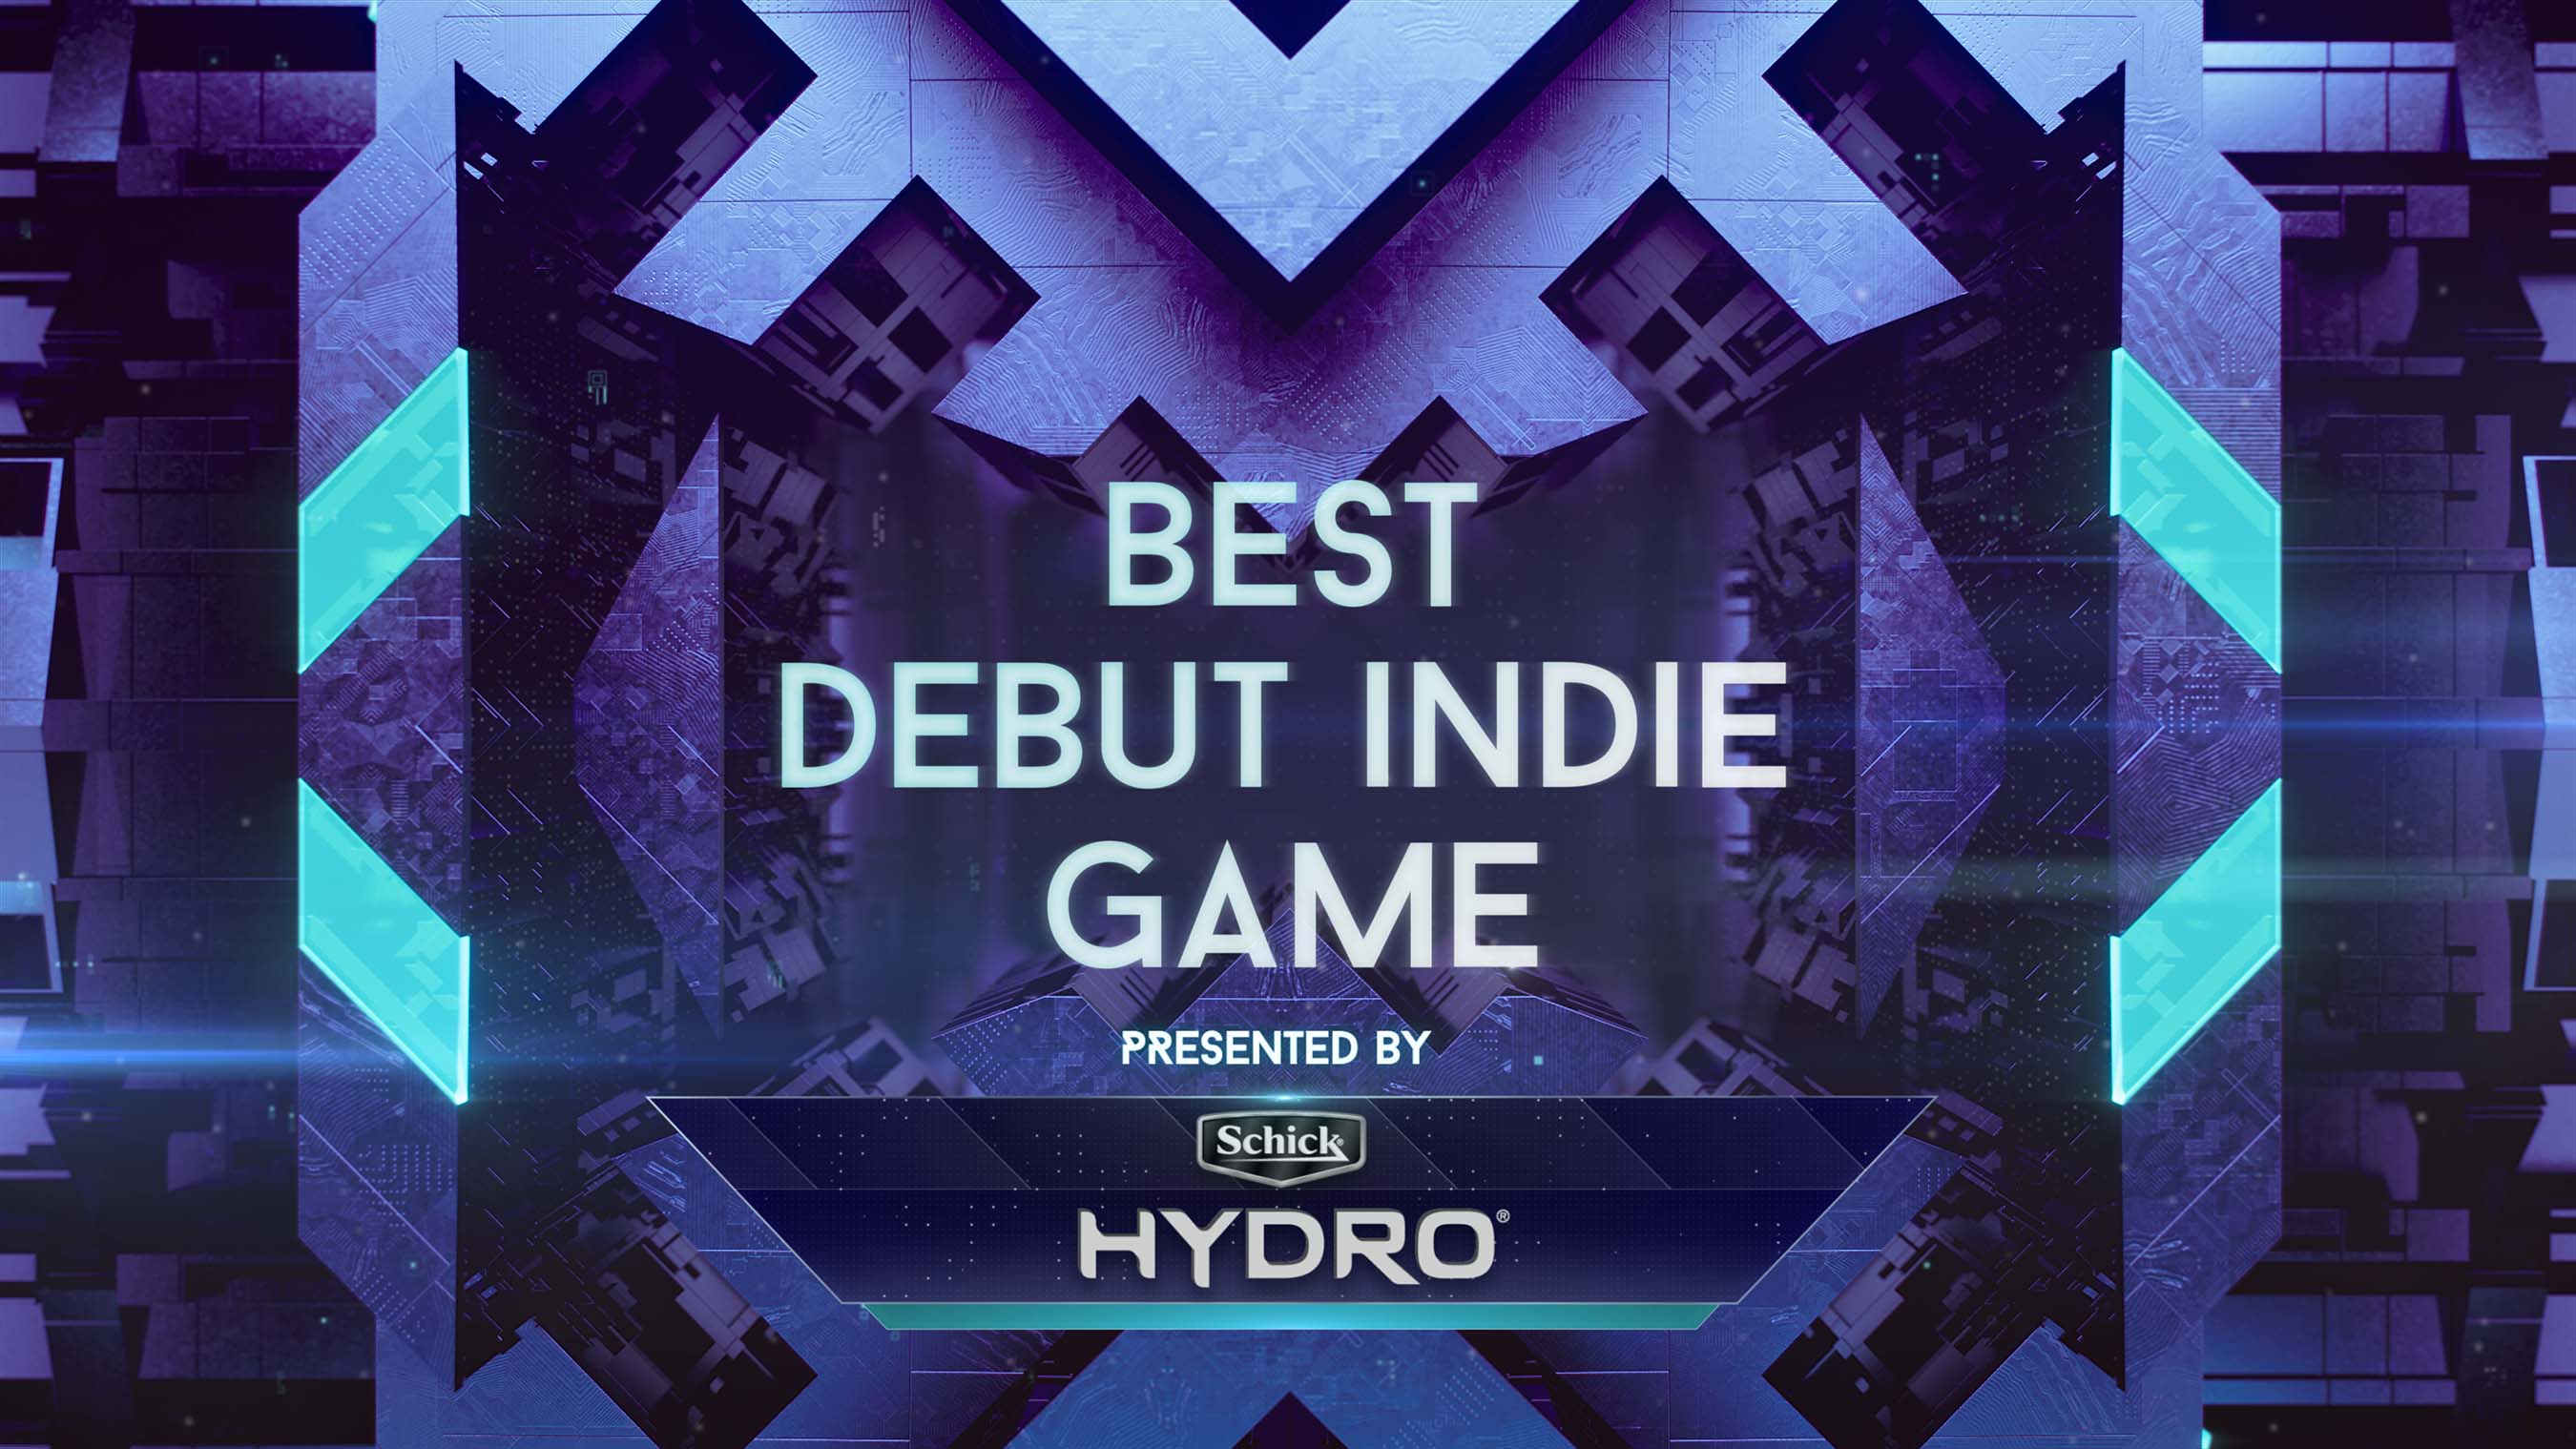 The five best indie gems announced at The Game Awards